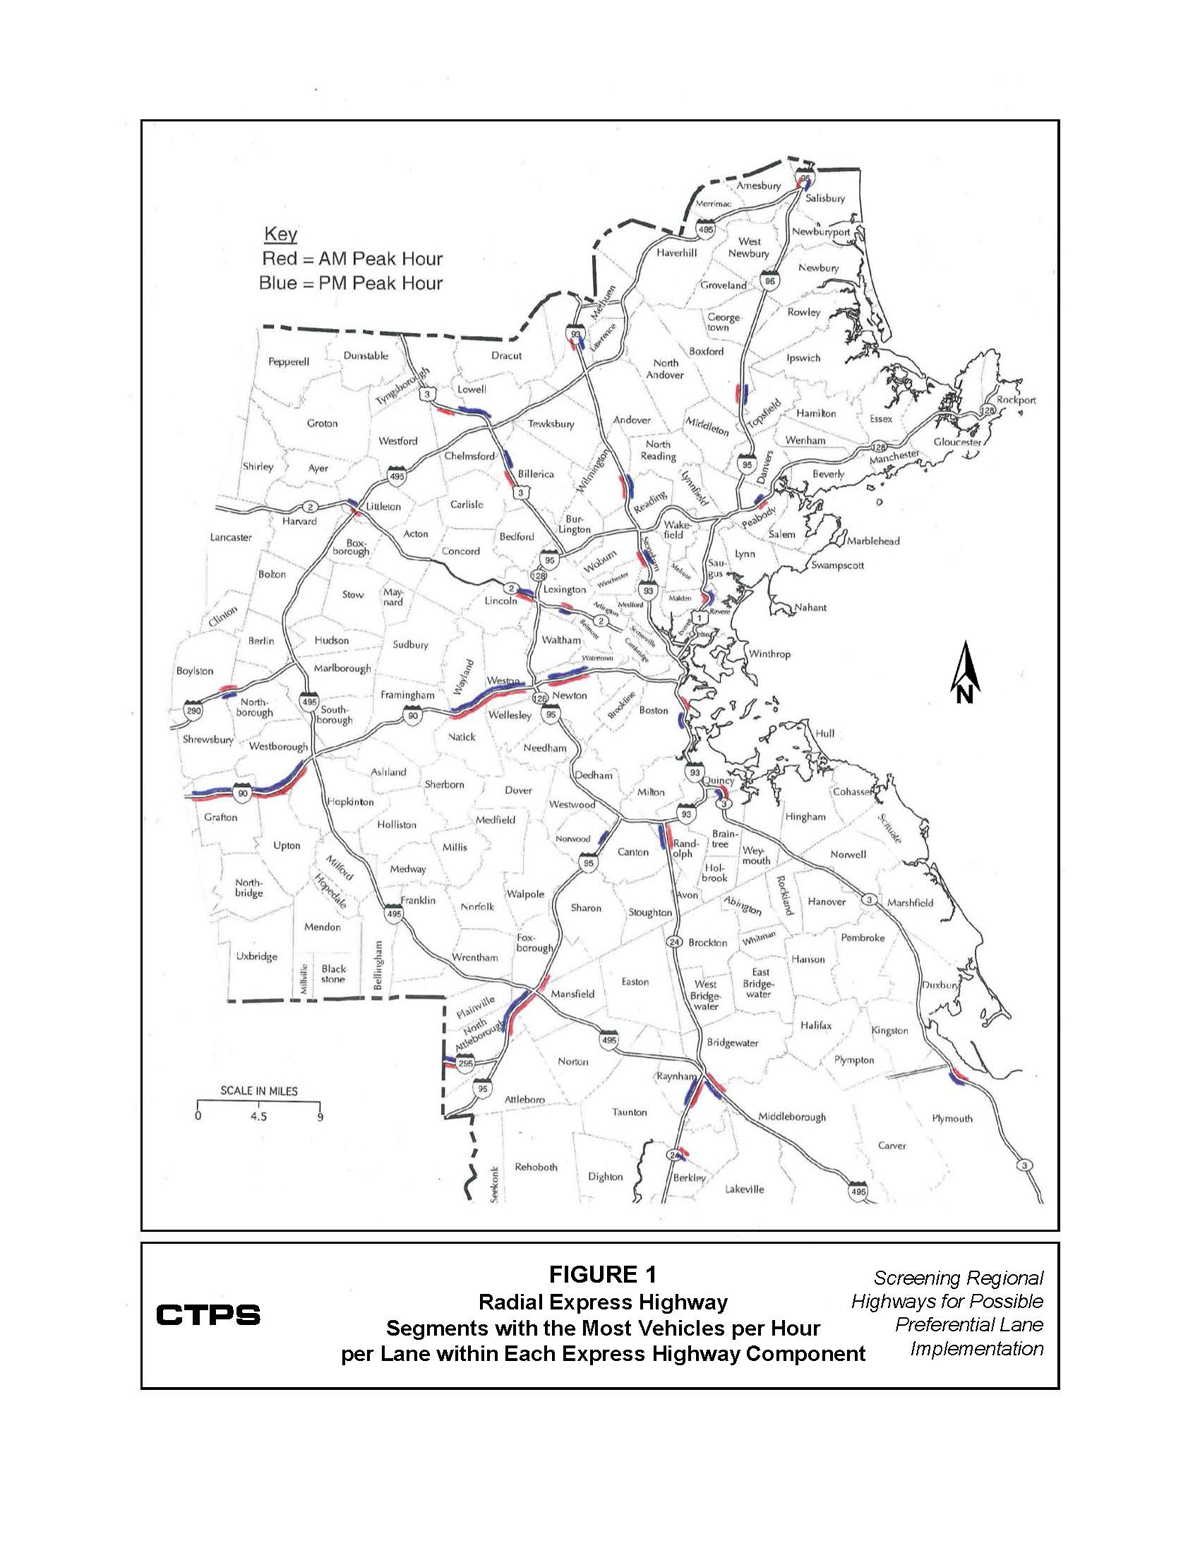 Figure 1 is a map of eastern Massachusetts. There are a total of 26 radial express highway system components. Within each of these components both the most congested AM segment and the most congested PM segment are highlighted.